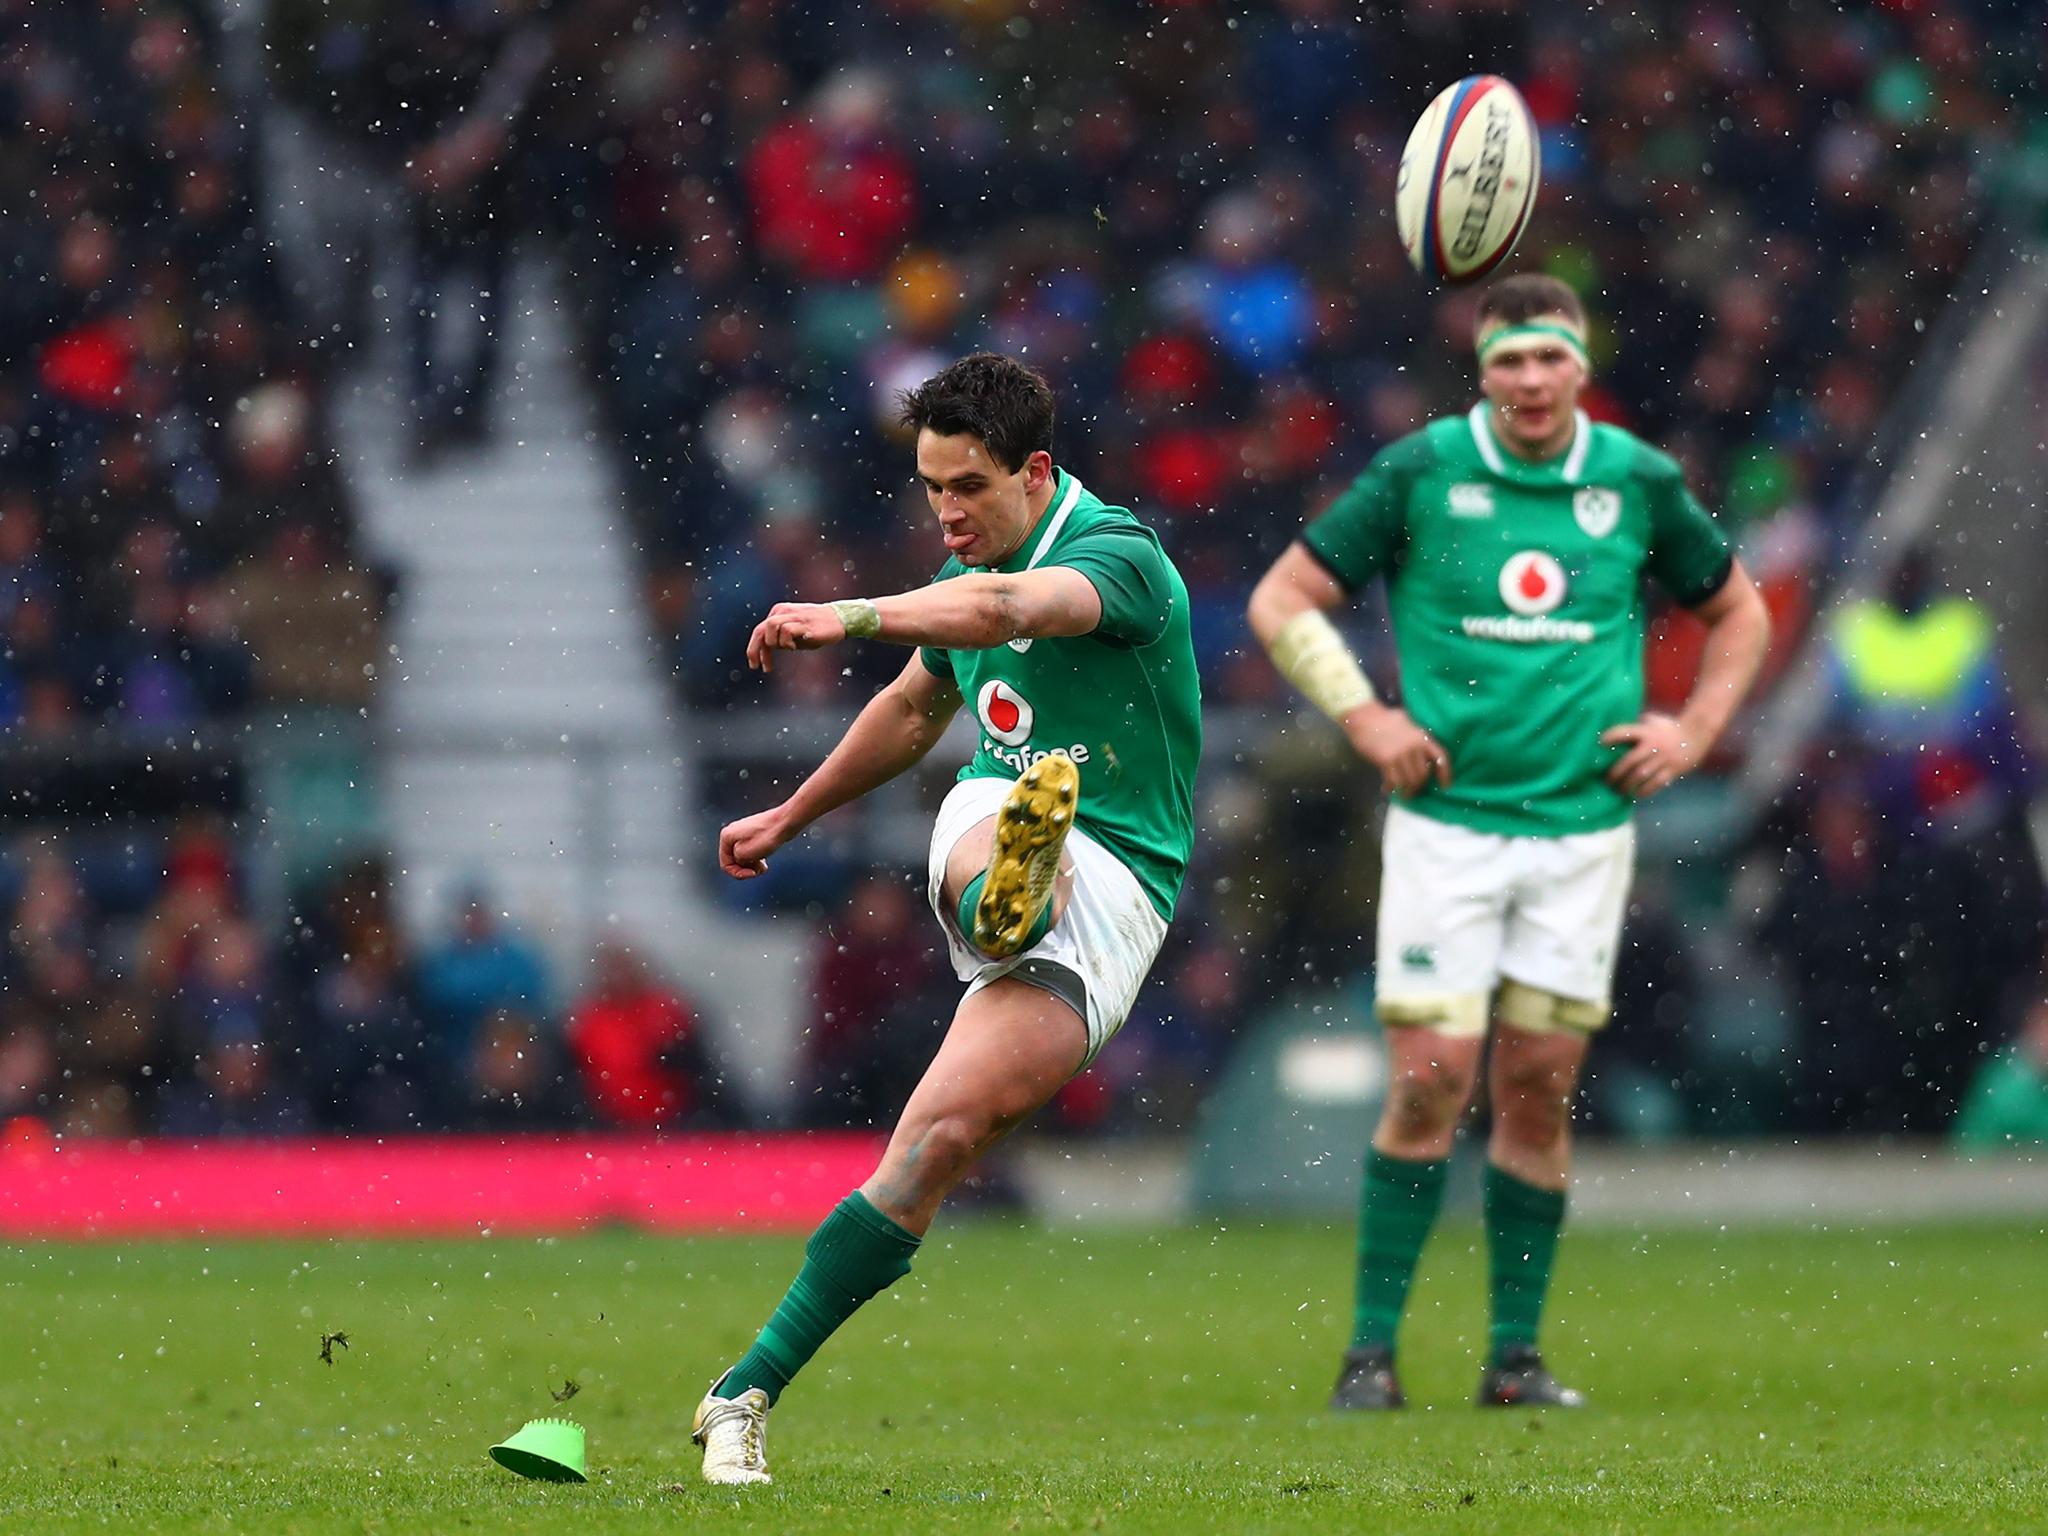 Joey Carbery starts at fly-half for Ireland's first Test with Australia